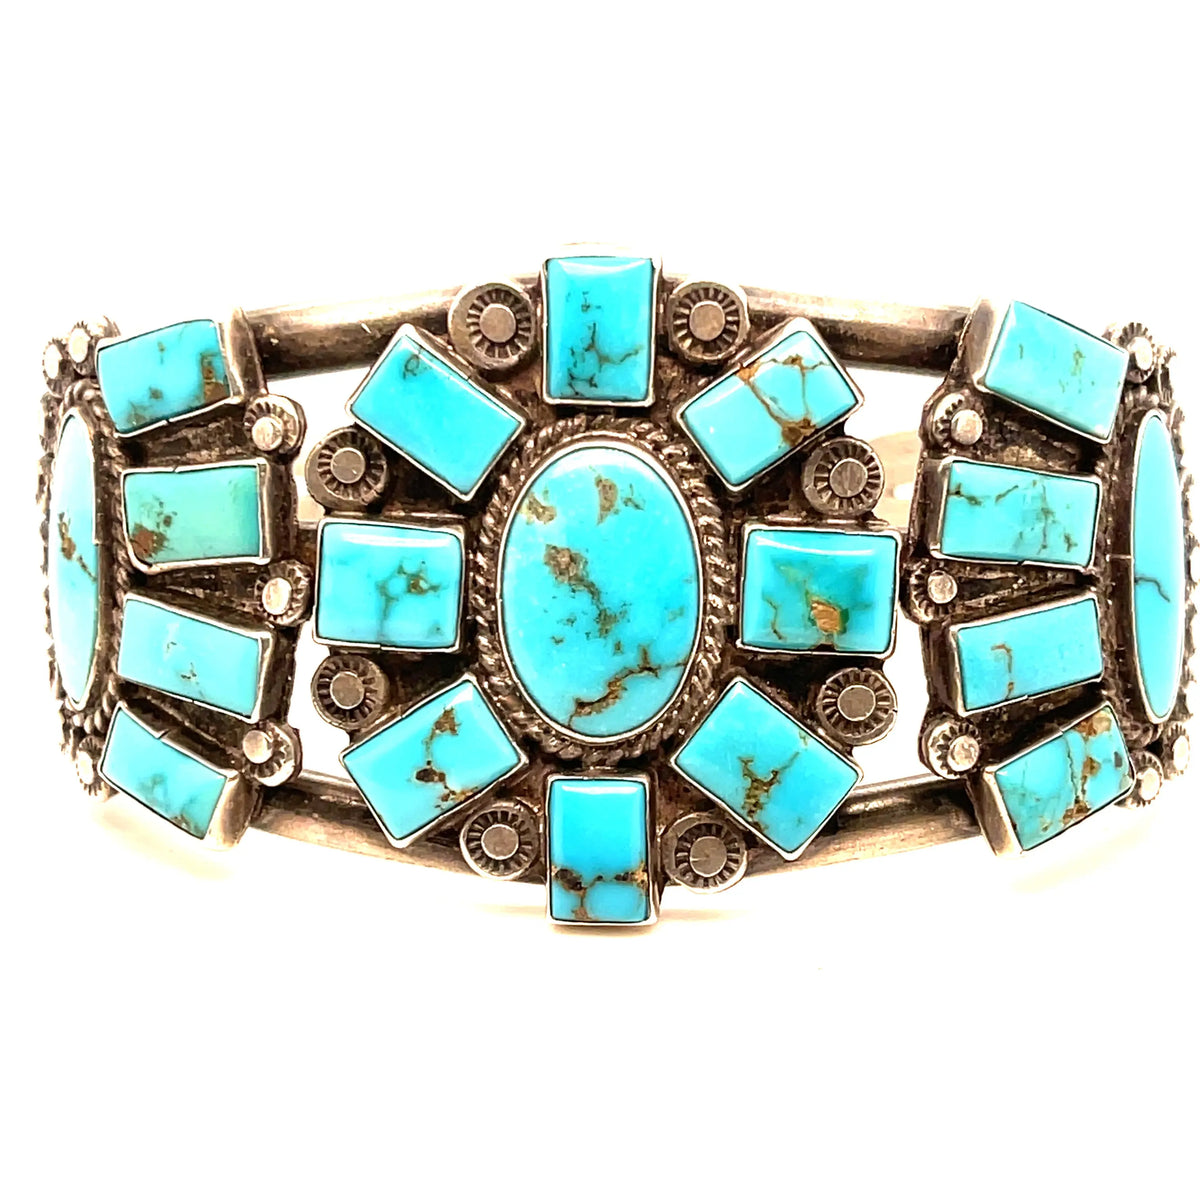 1930s Vintage Sterling Silver Blue Gem Turquoise Bracelet with 19 pieces of Turquoise  Dimensions: openning 1.2in and cirmunference 2.5in  NOTE: Please bear that in mind that, when you purchase vintage, it might not be perfect, but it will be authentic. Please contact shop@sbvail.com if you have additional questions about the nature and condition of the product.